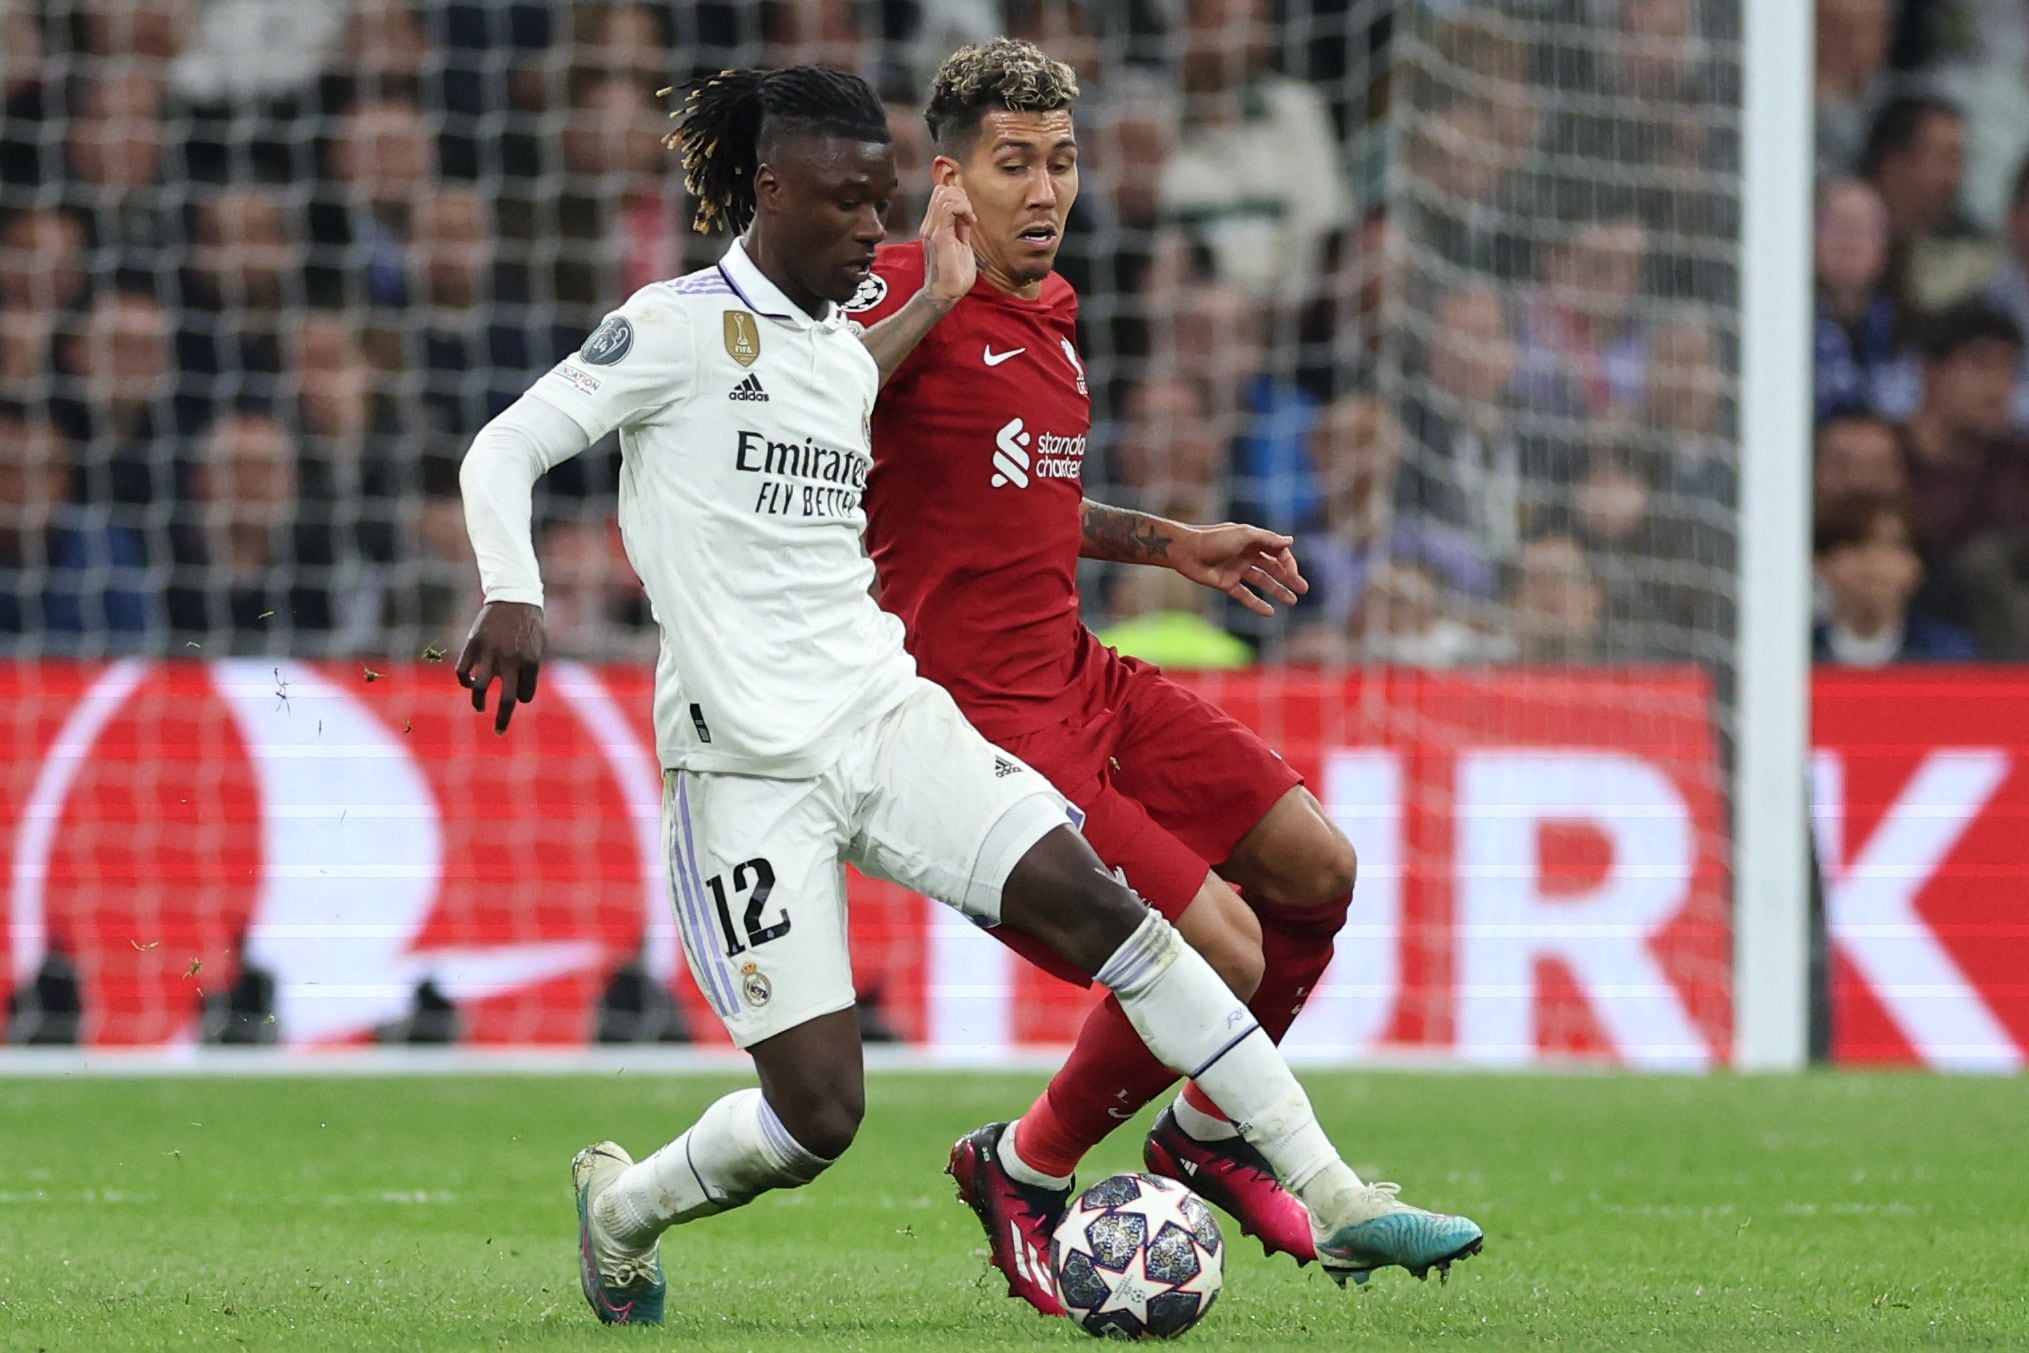 Real Madrid's French midfielder Eduardo Camavinga (L) vies with Liverpool's Brazilian forward Roberto Firmino during the UEFA Champions League last 16 second leg football match between Real Madrid CF and Liverpool FC at the Santiago Bernabeu stadium in Madrid on March 15, 2023. (Photo by Pierre-Philippe Marcou / AFP)